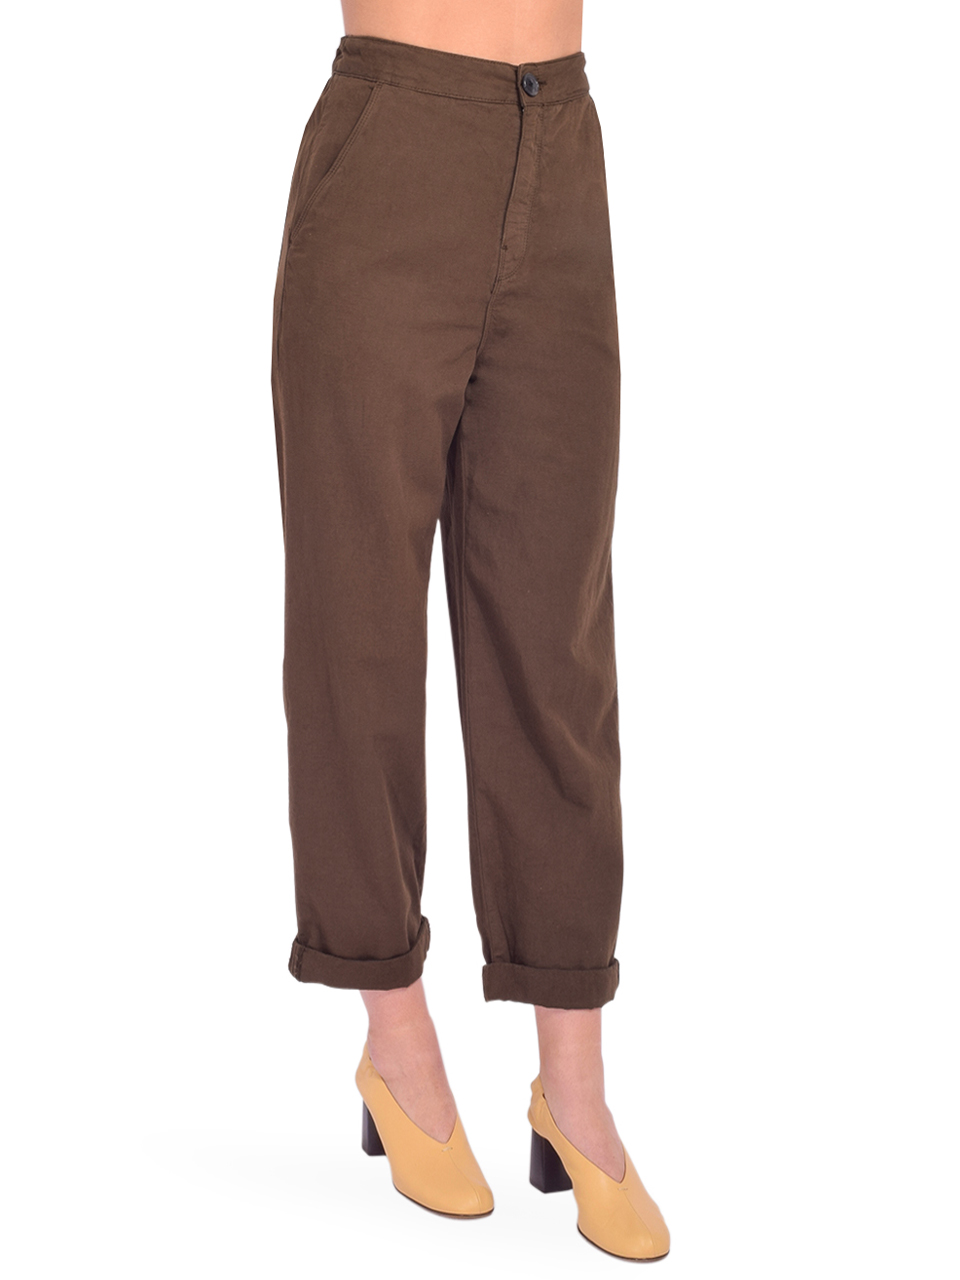 BELLEROSE Pasop Relaxed Pant in Brown Side View 